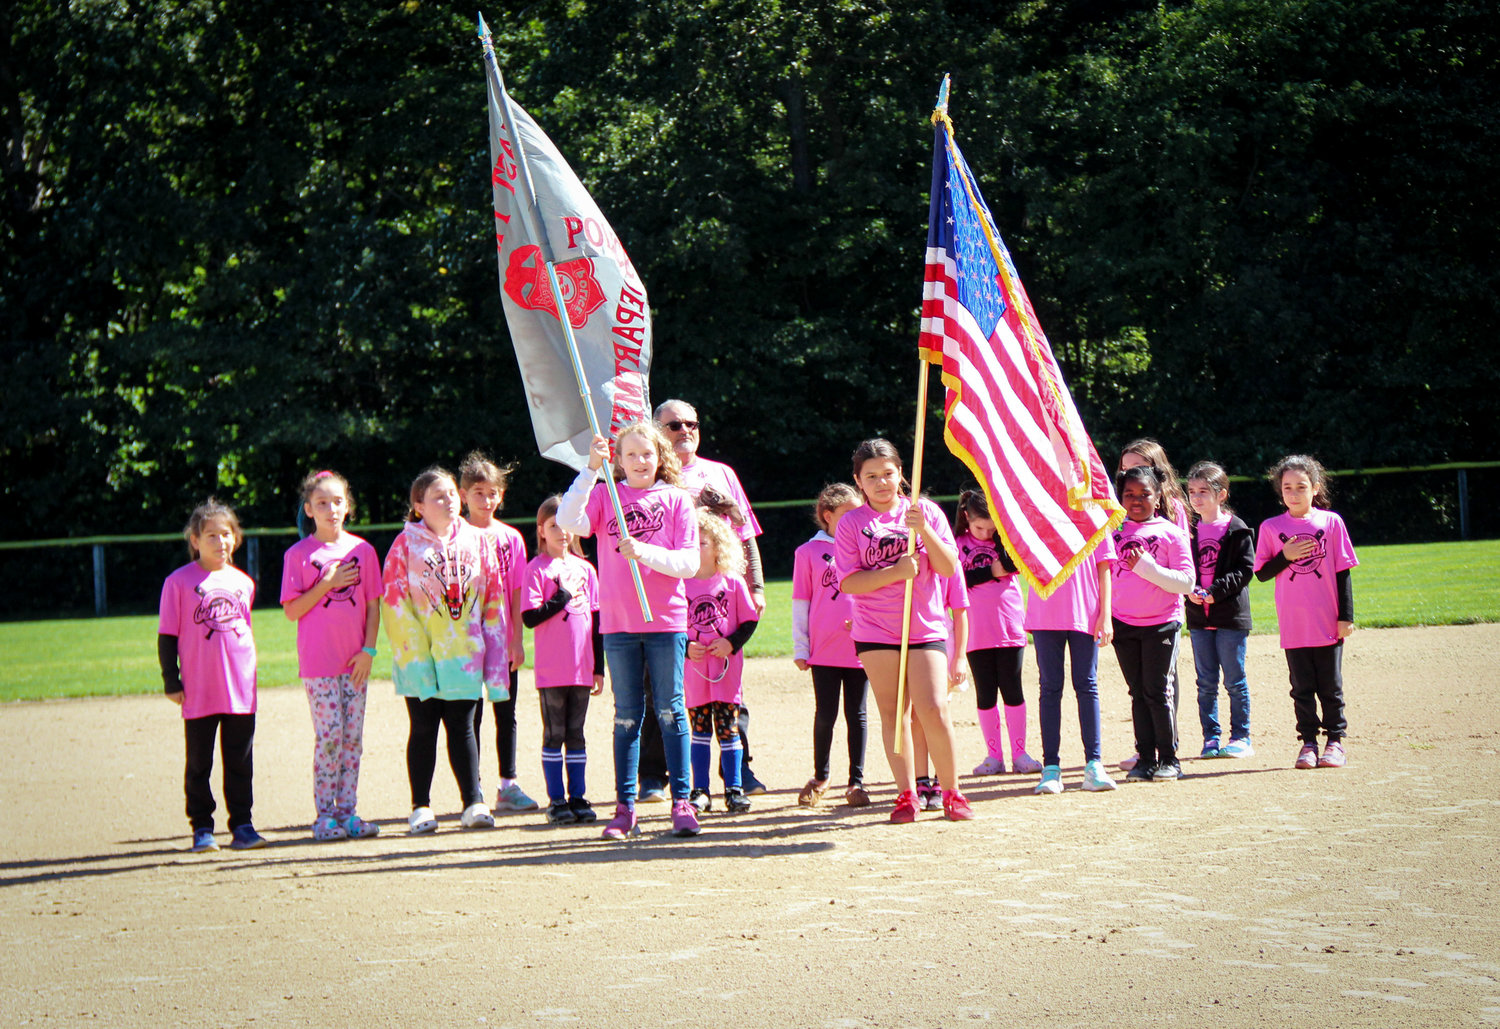 EPCLL players serve a flag bearers prior to the game.